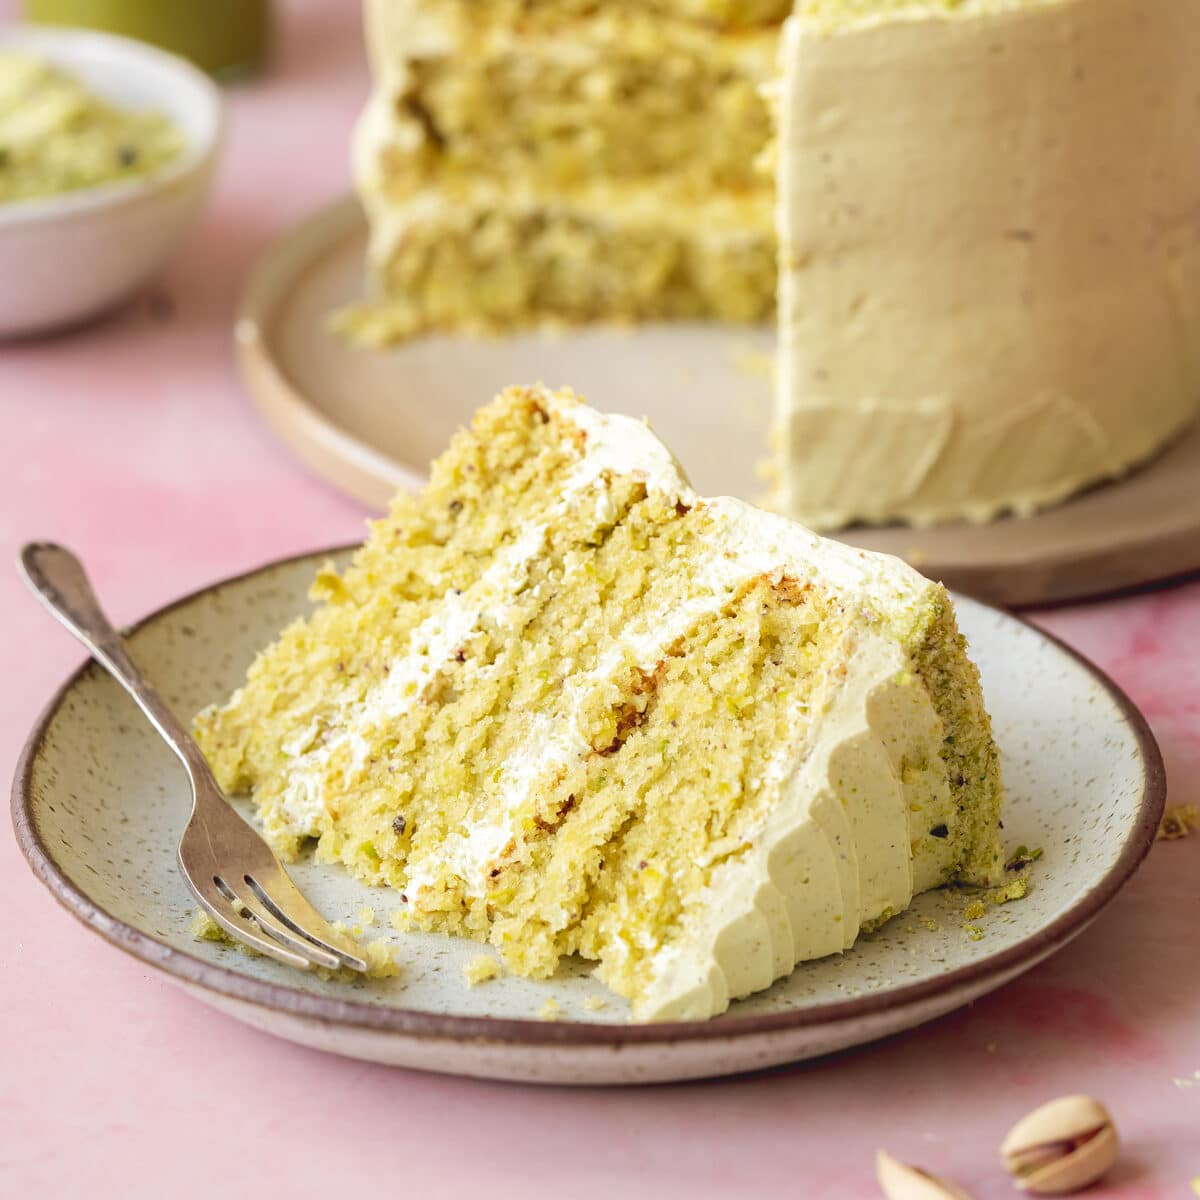 a slice of vegan pistachio cake layered with pistachio buttercream on a ceramic plate. There is a full cake in the background along with a small bowl of chopped pistachios.